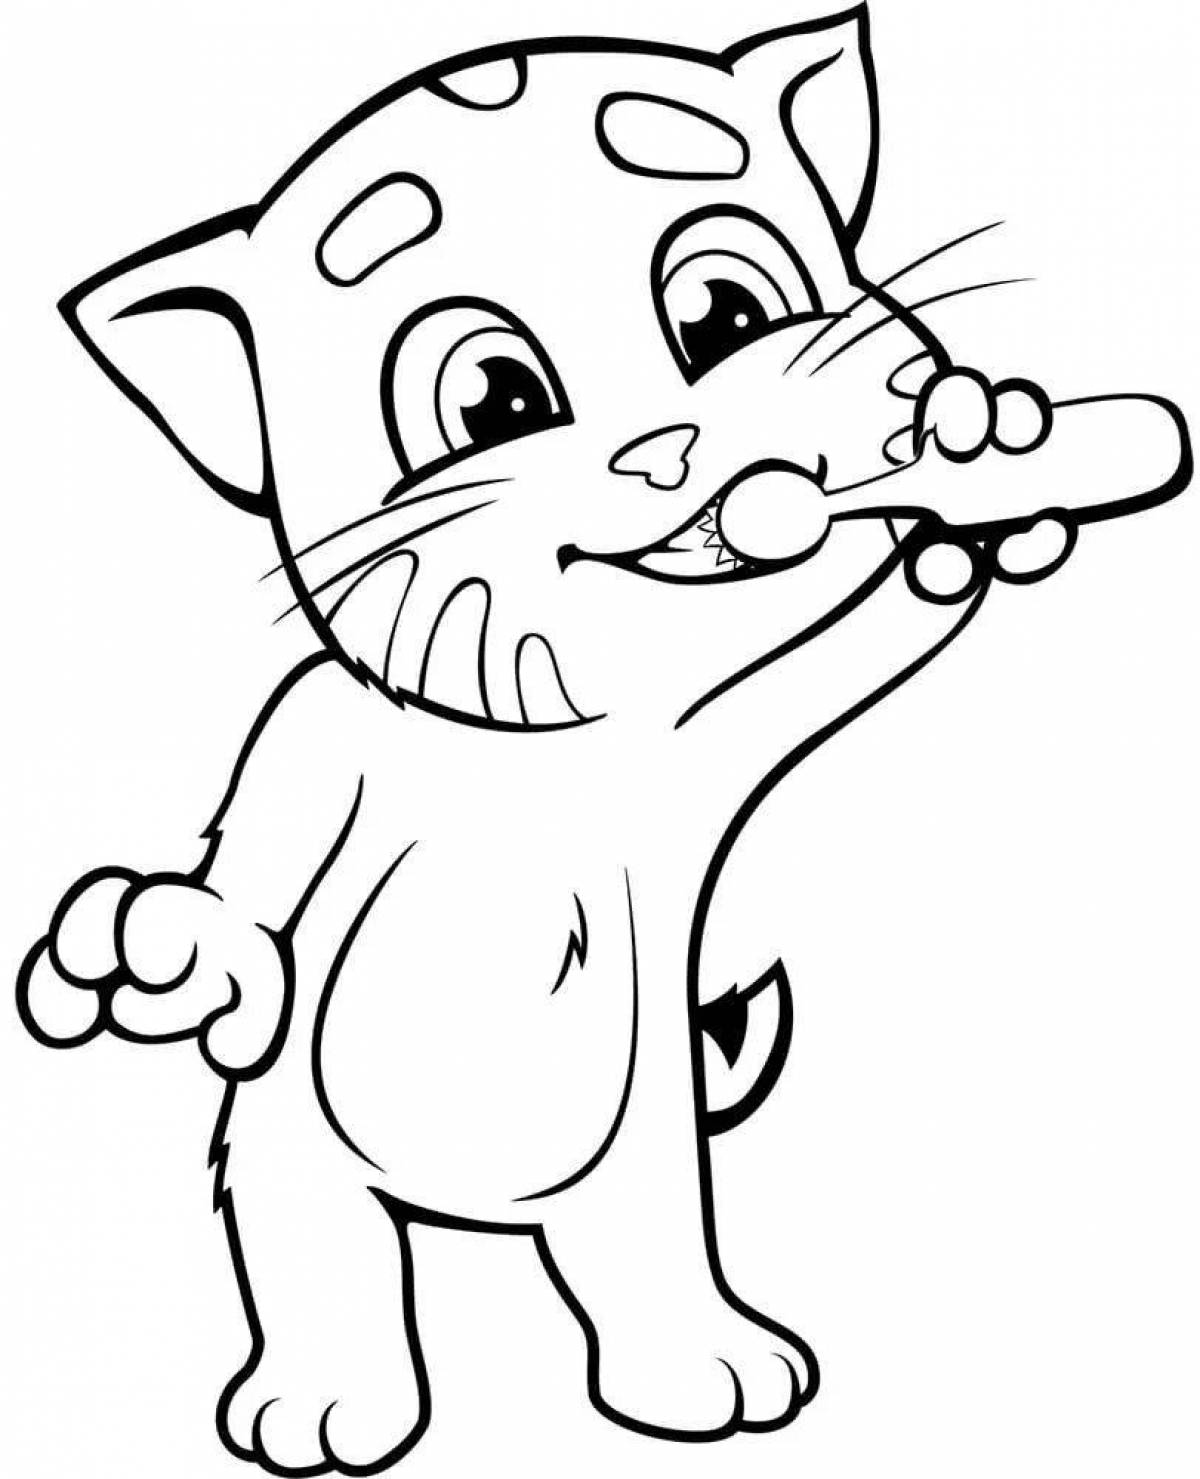 Color-frenzy coloring page please